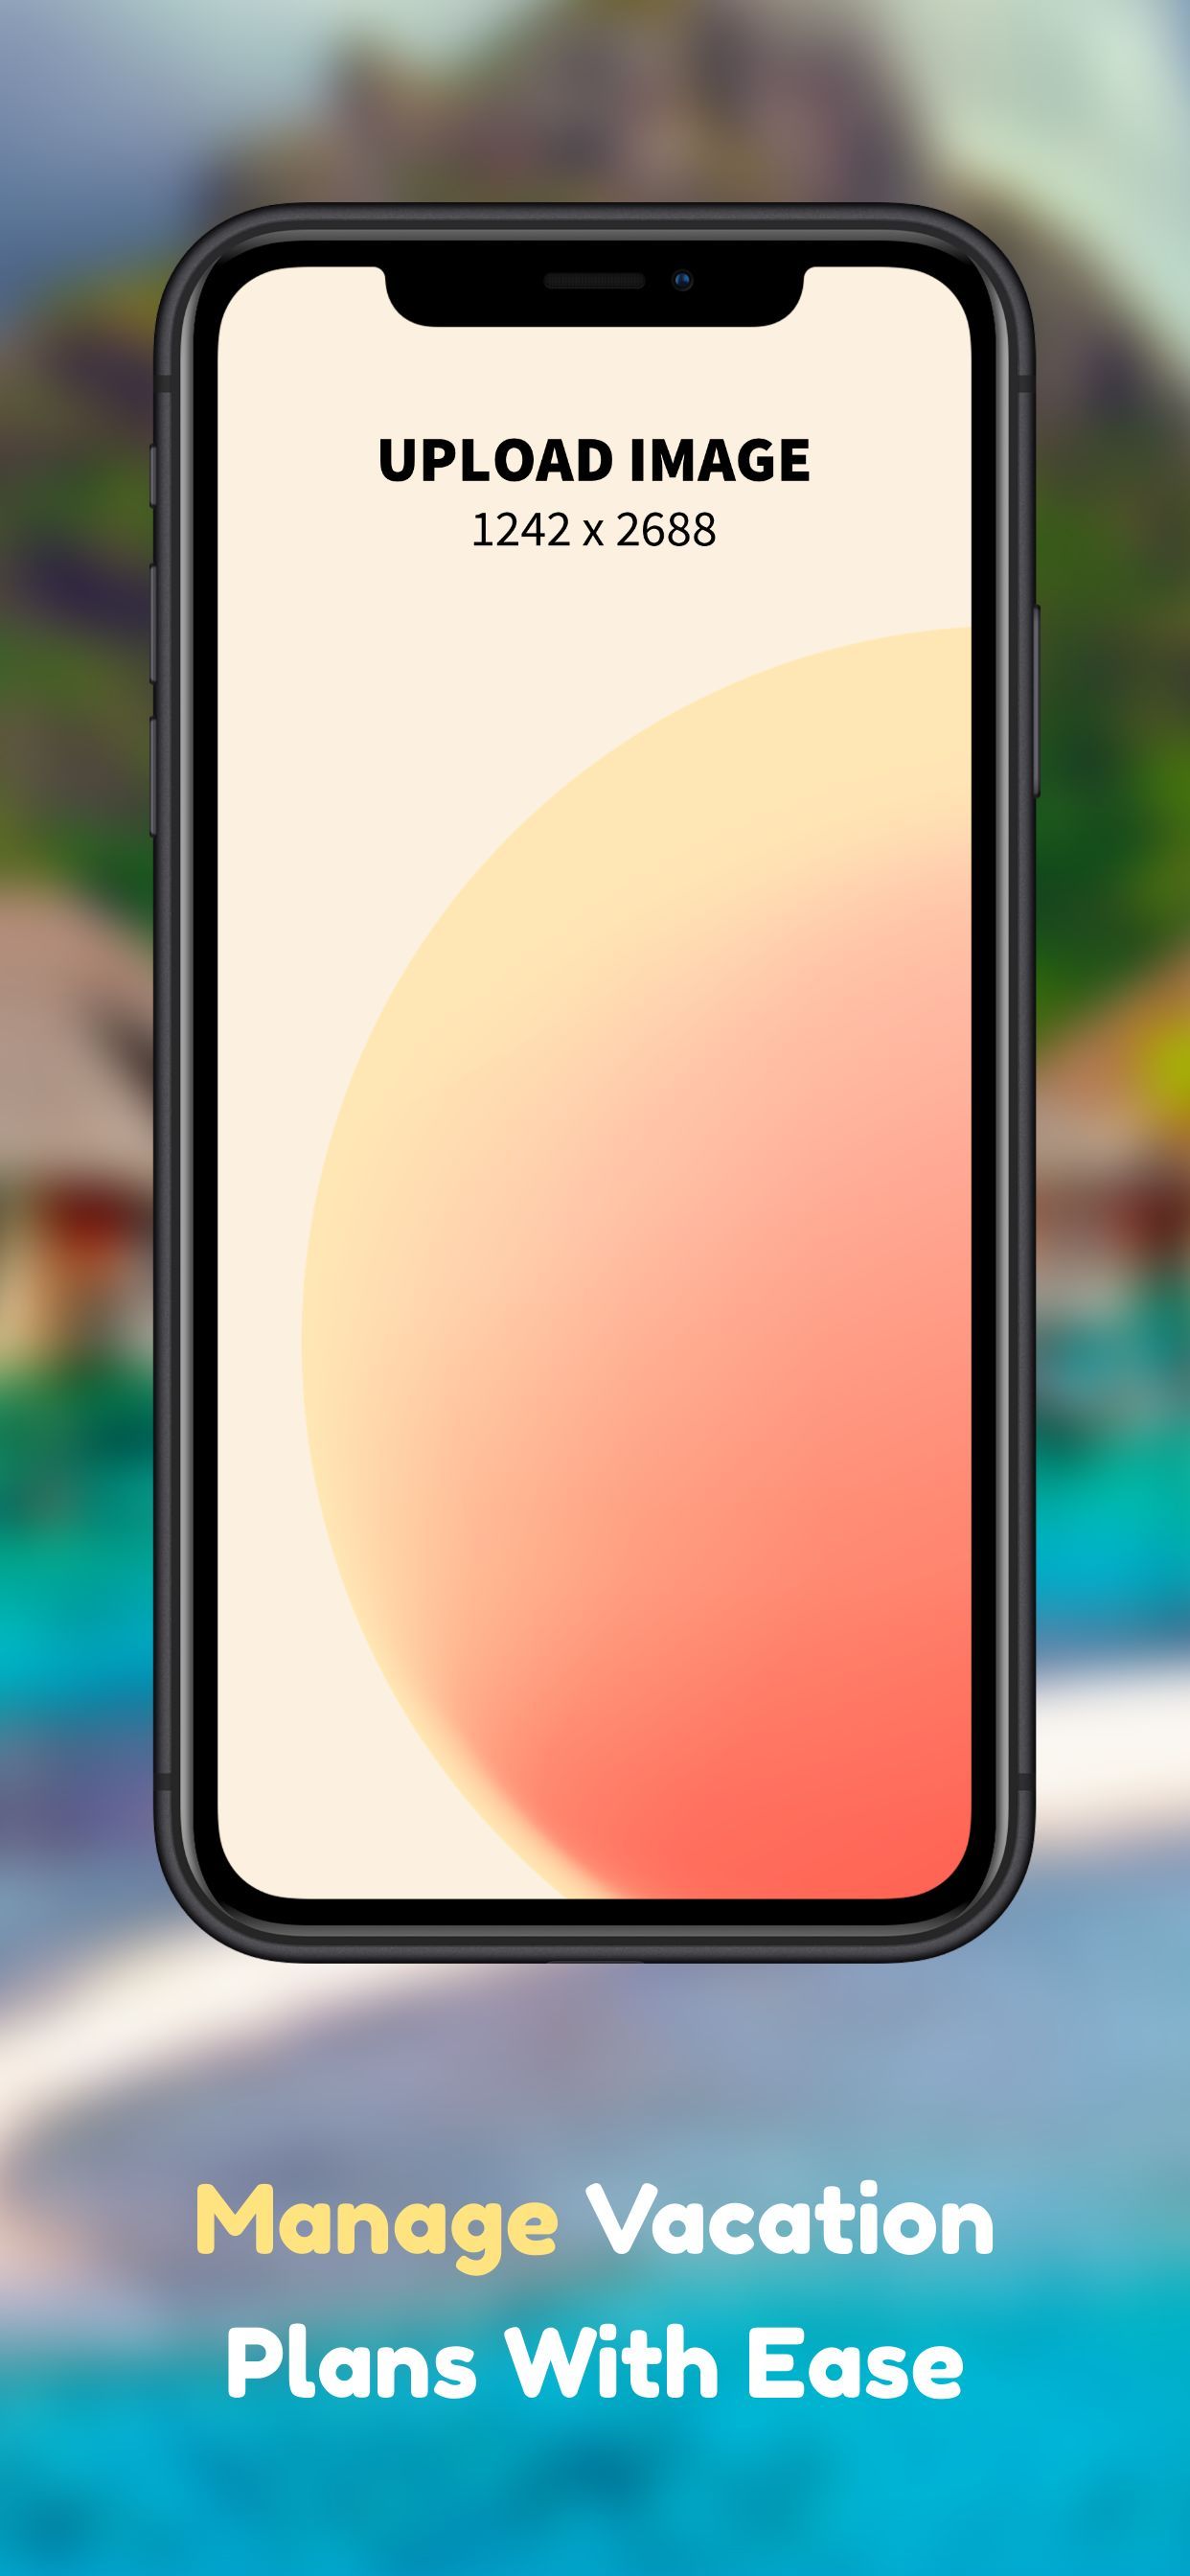 iPhone XS Max Screenshot 58 template. Quickly edit fonts, text, colors, and more for free.